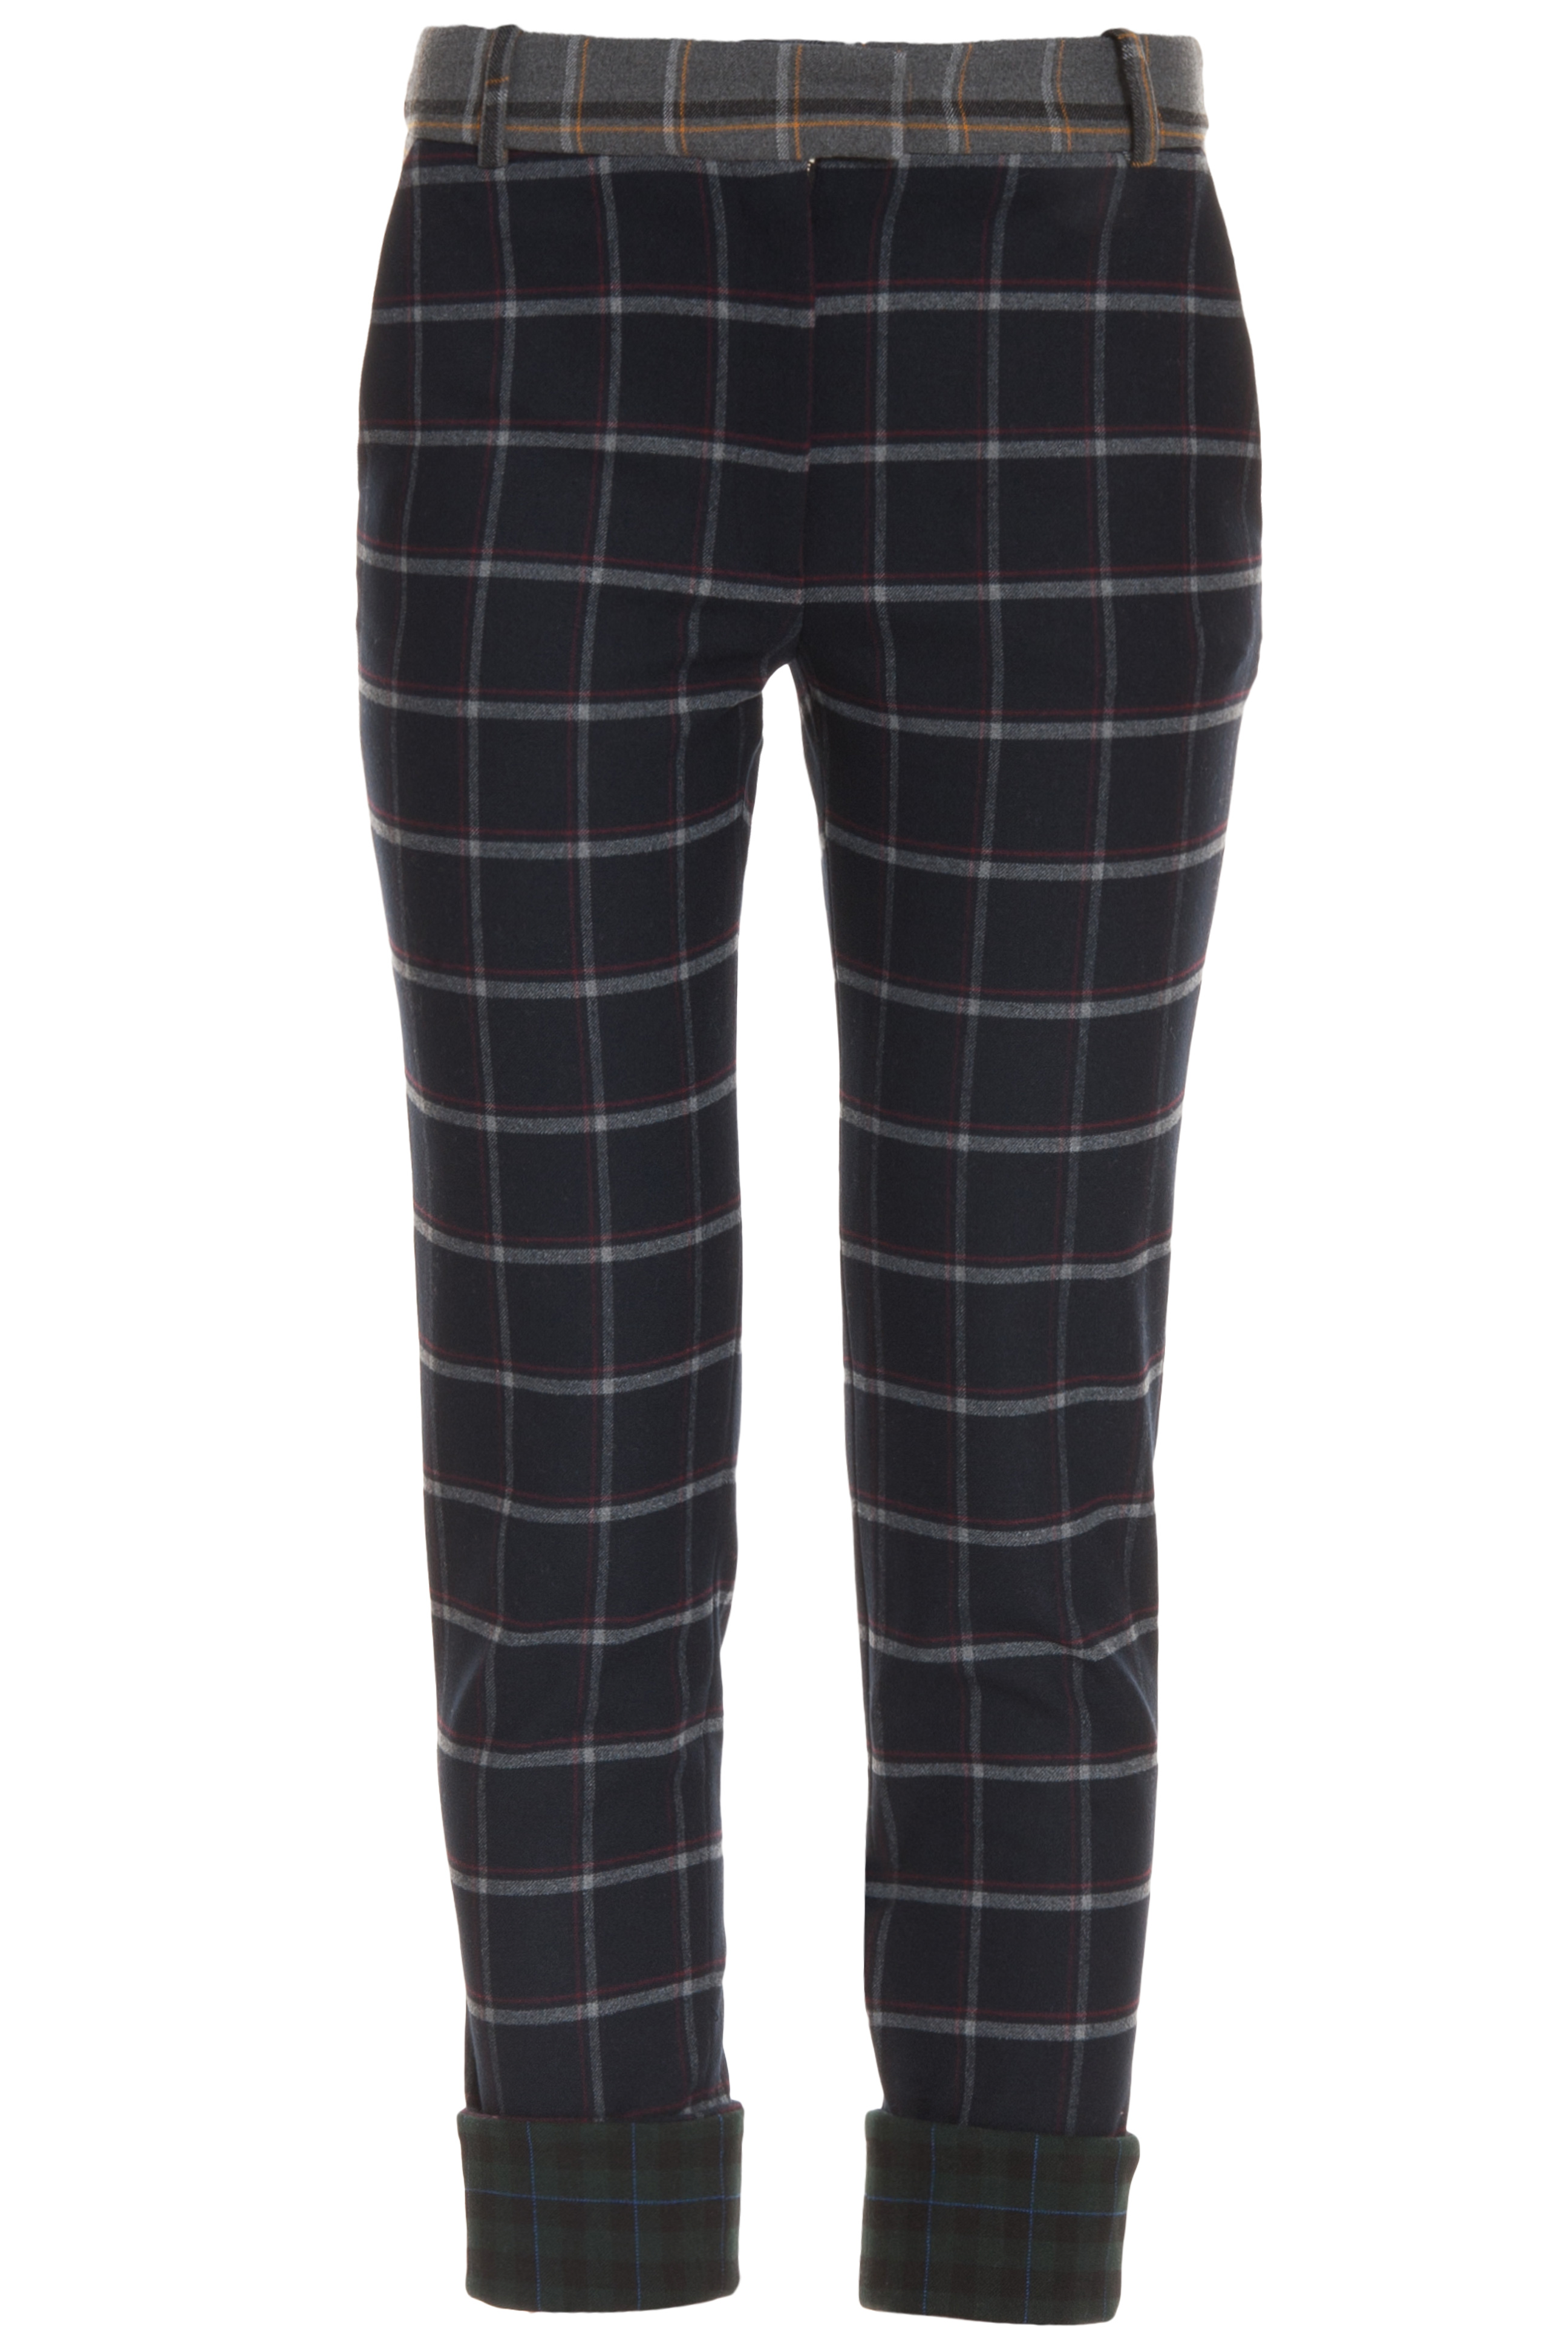 BOY BY BAND OF OUTSIDERS Lk4 Check Wool Pant